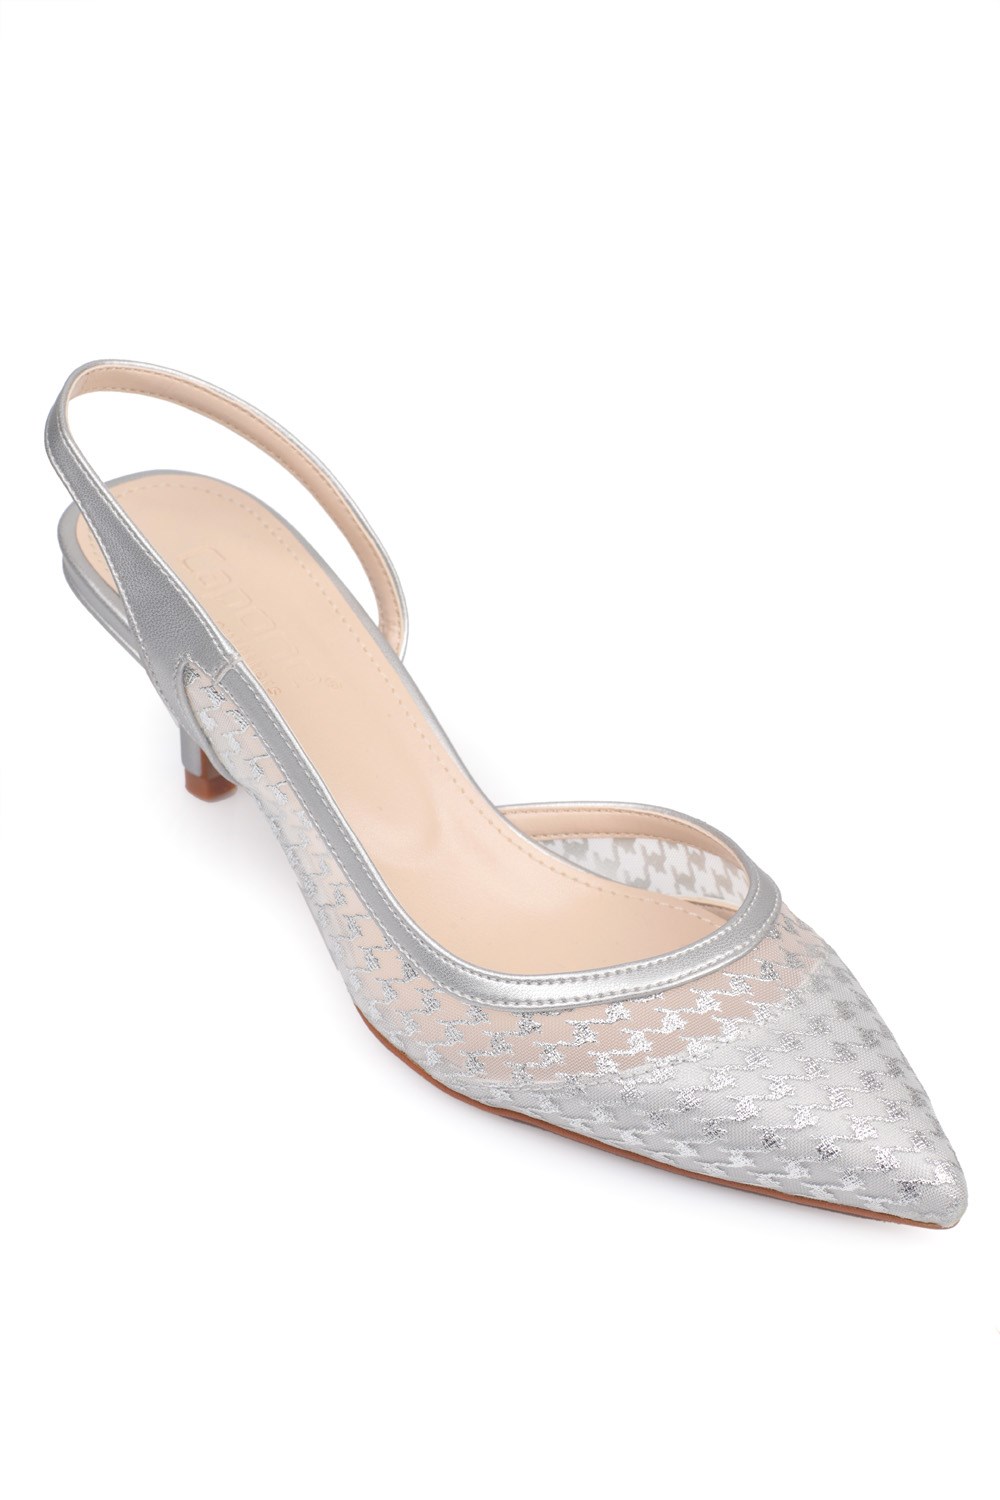 Capone Pointed Toe Slingback Mid Heel Netted Women Silver Shoes